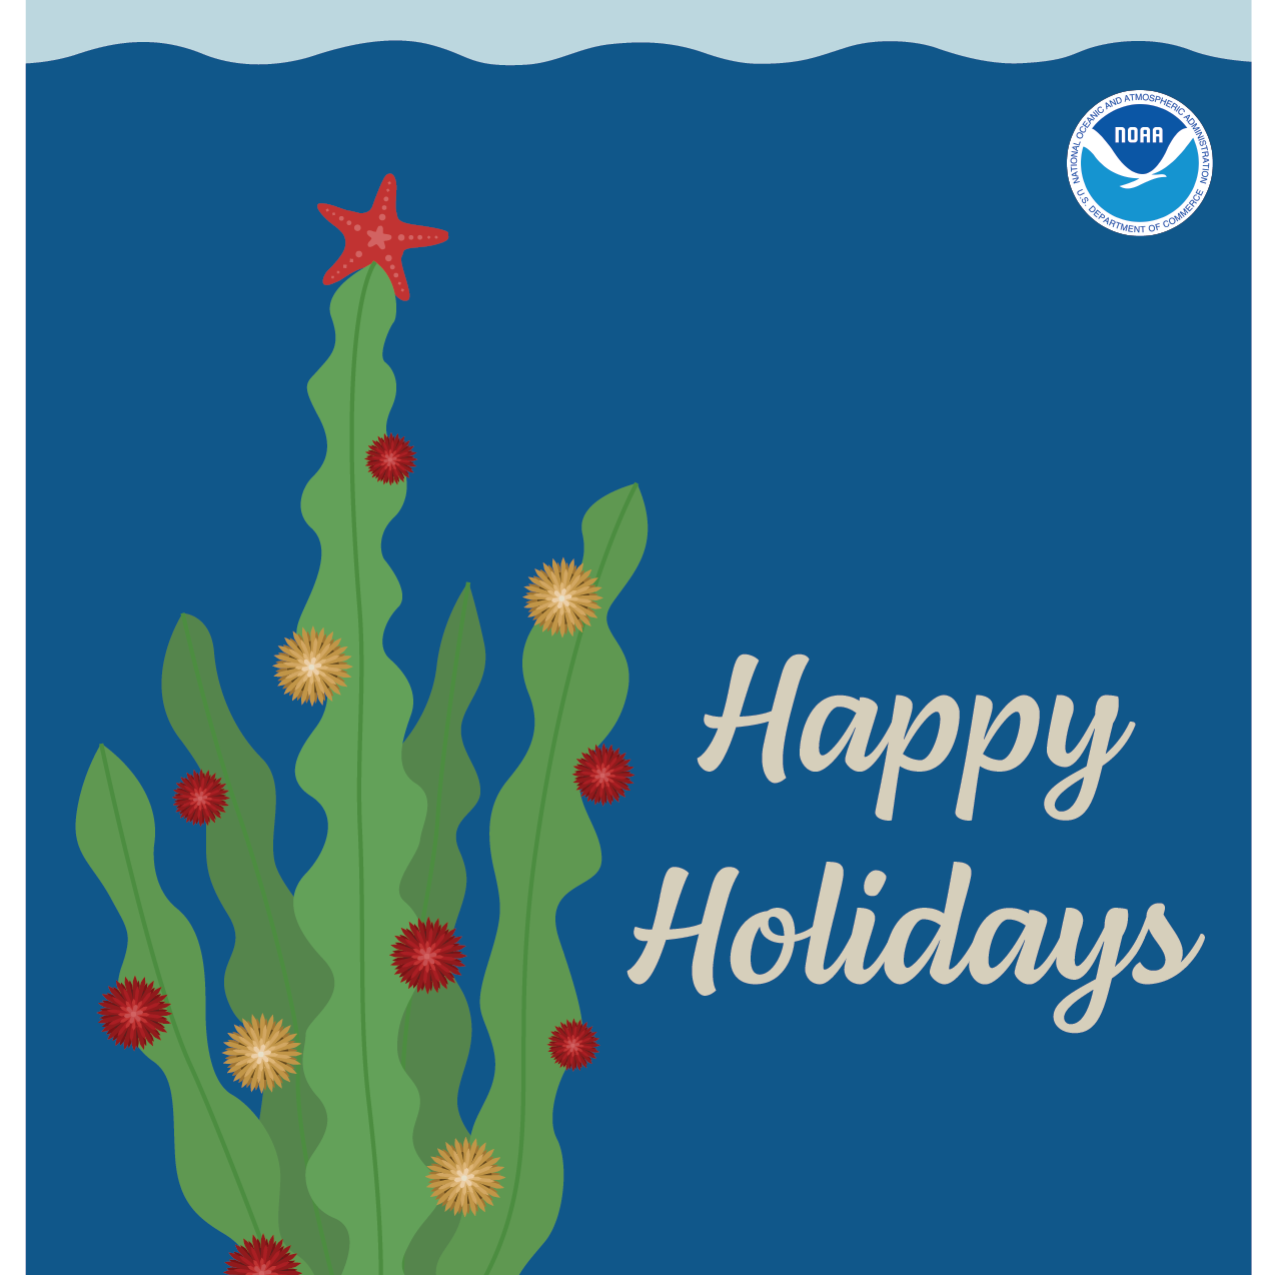 An illustrated holiday card featuring a decorated kelp tree with a sea star at the top. There are presents in the sand under the kelp tree, a NOAA logo, and writing that reads “Happy holidays from the NOAA Office of Education.” At the bottom a link reads noaa.gov/education.